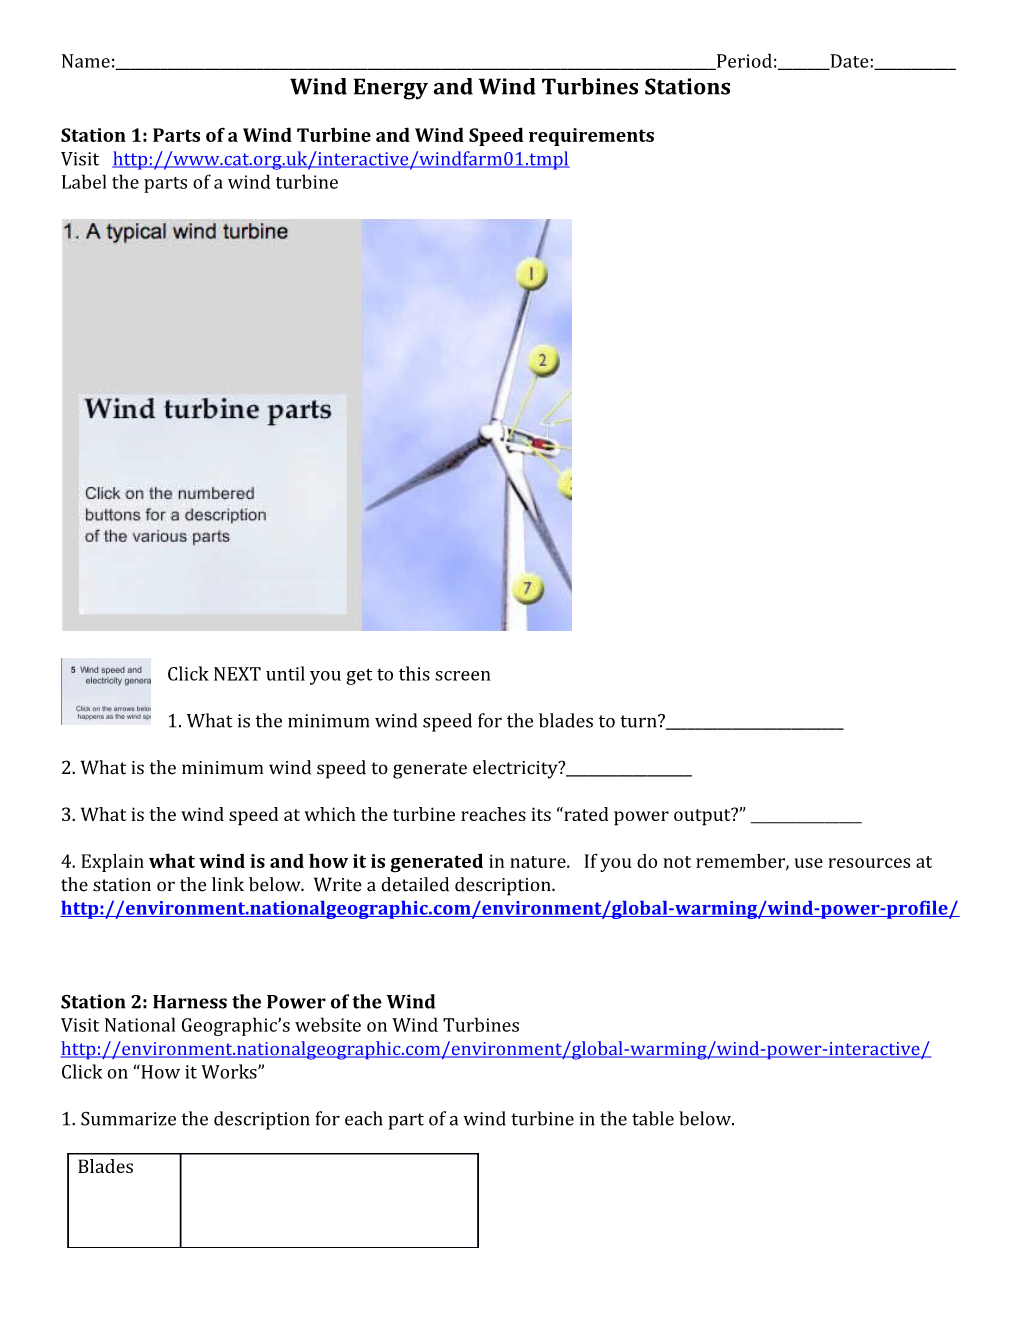 Wind Energy and Wind Turbines Stations